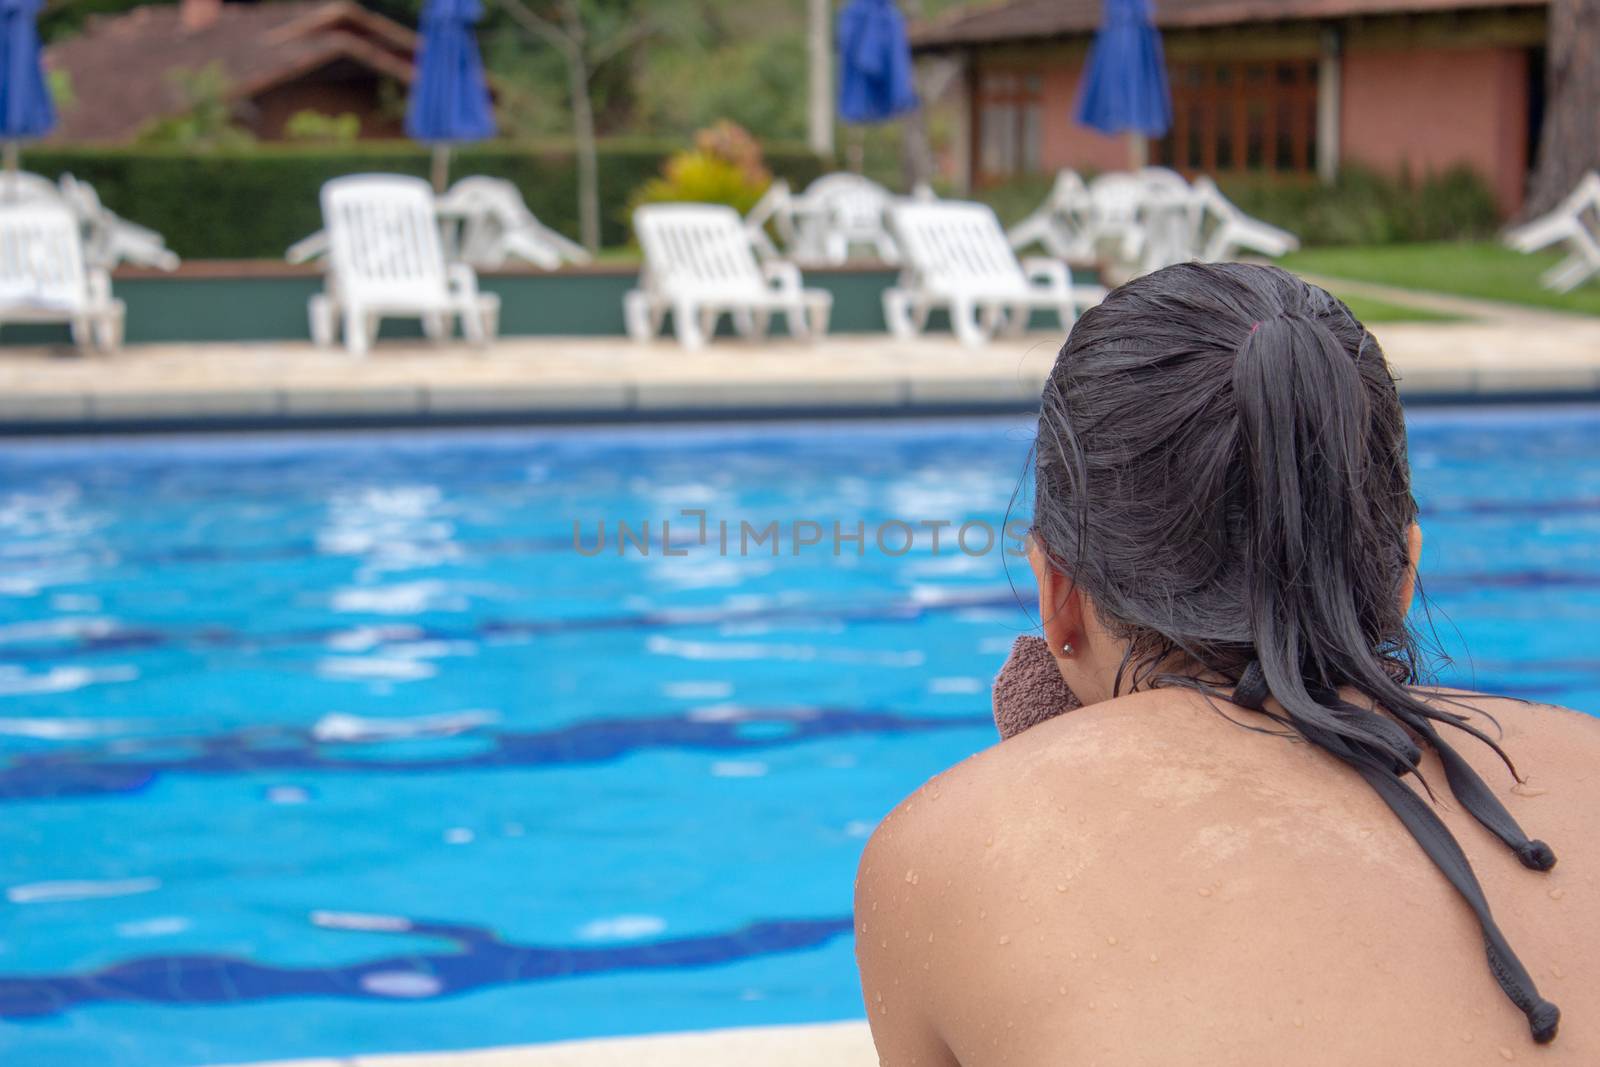 Woman after getting out the pool, gazing at the blue water